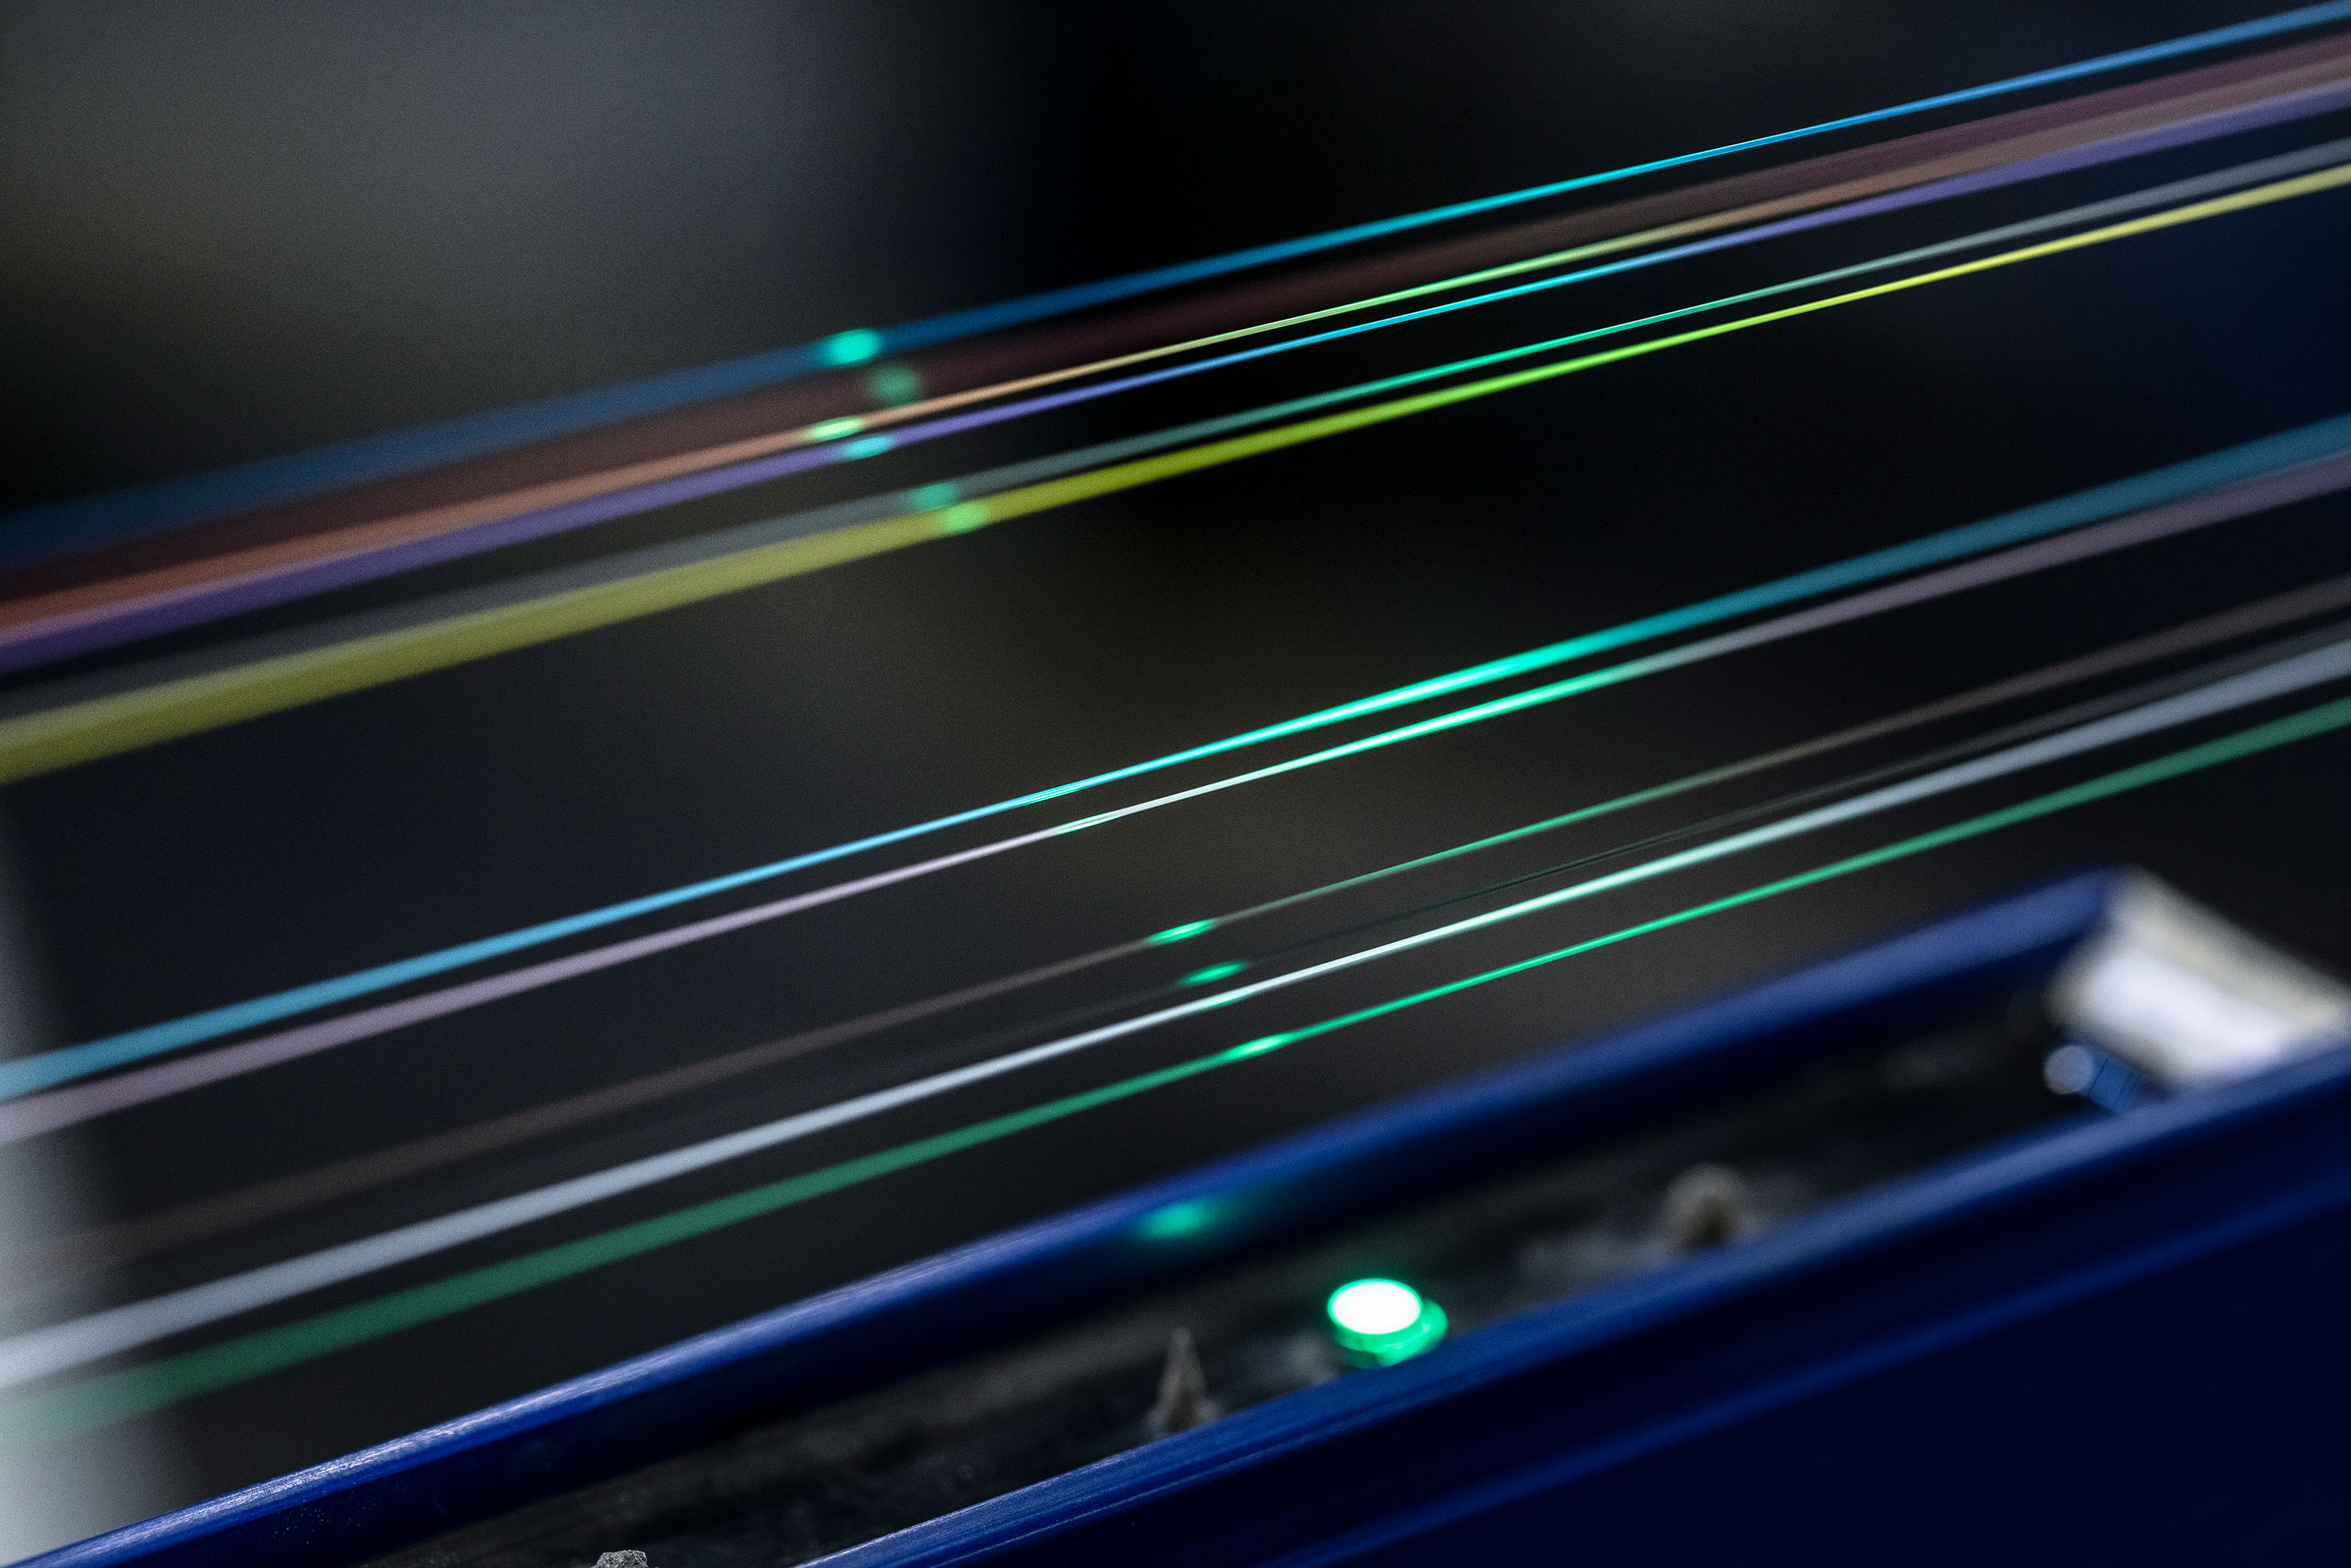 Close-up of vibrant, illuminated fiber optiv wires glowing in different colors against a dark background.